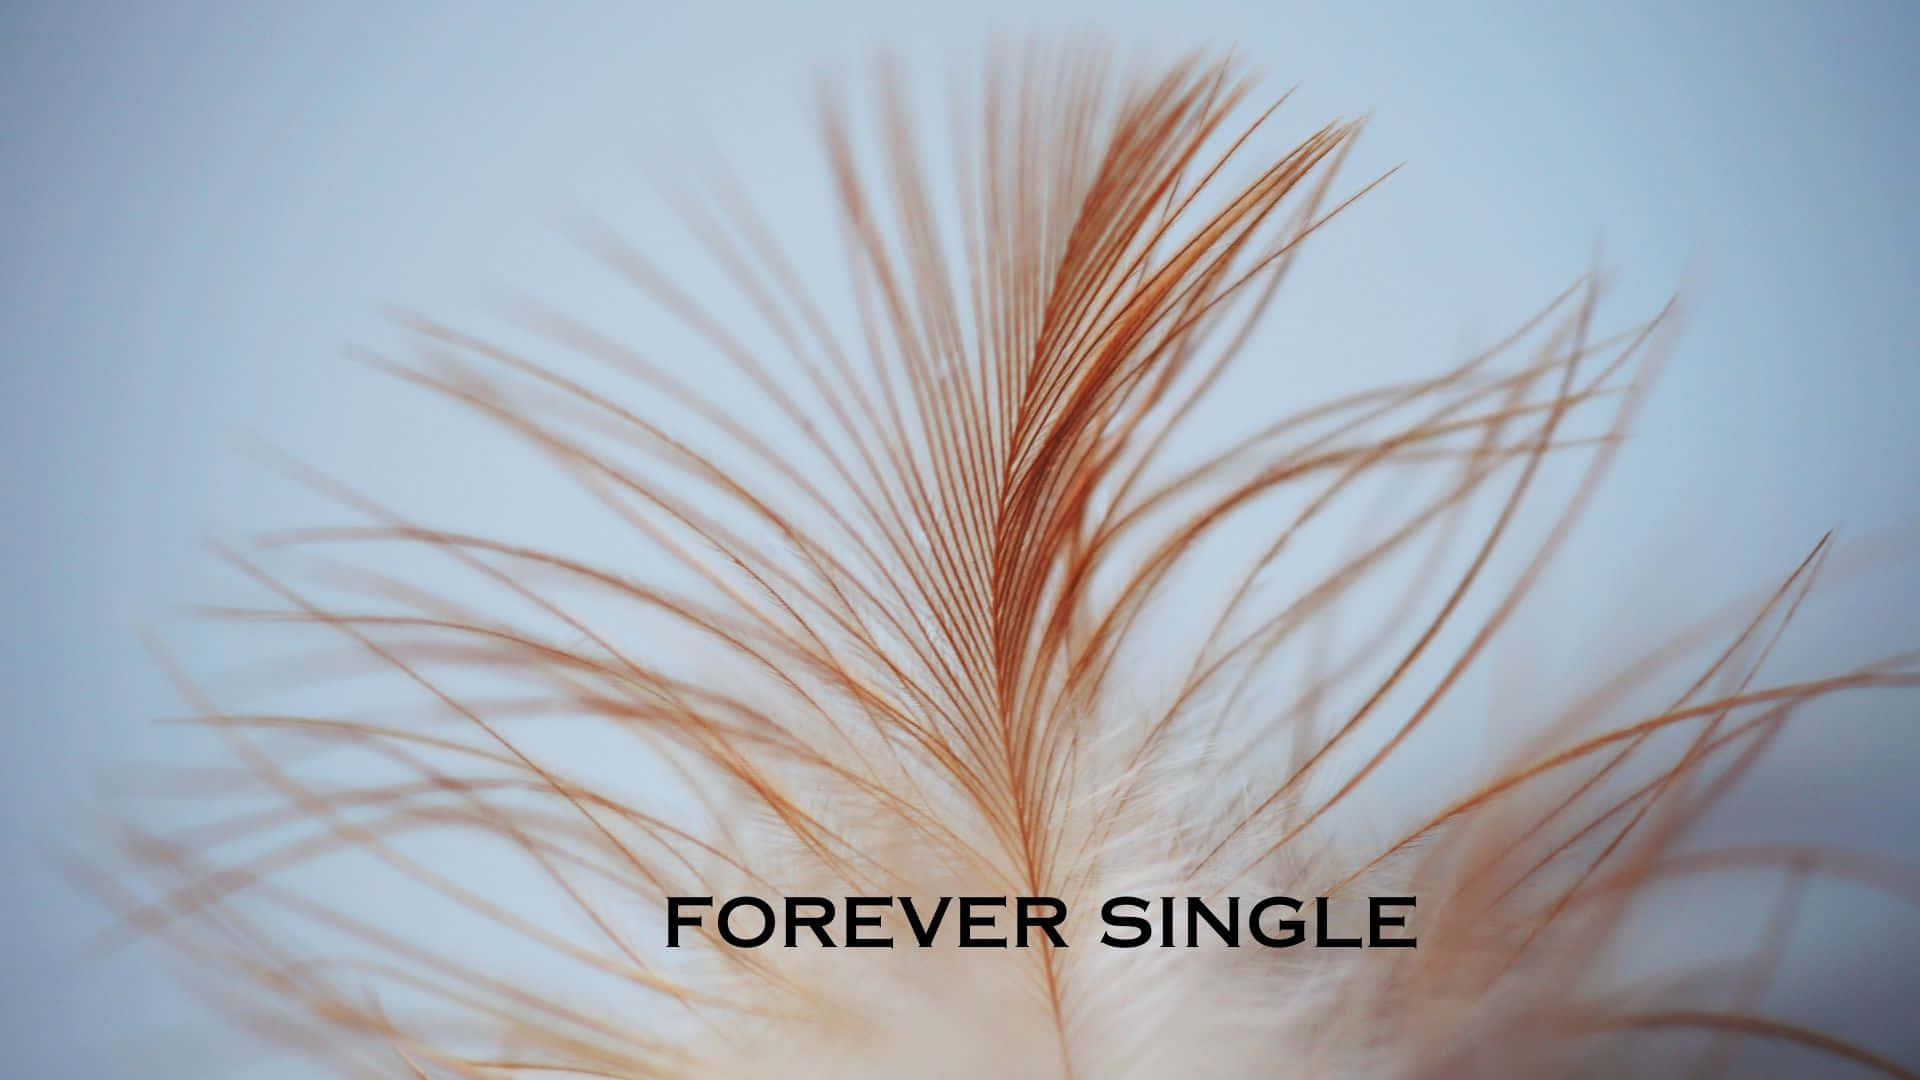 A Close Up Of A Feather With The Words Forever Single